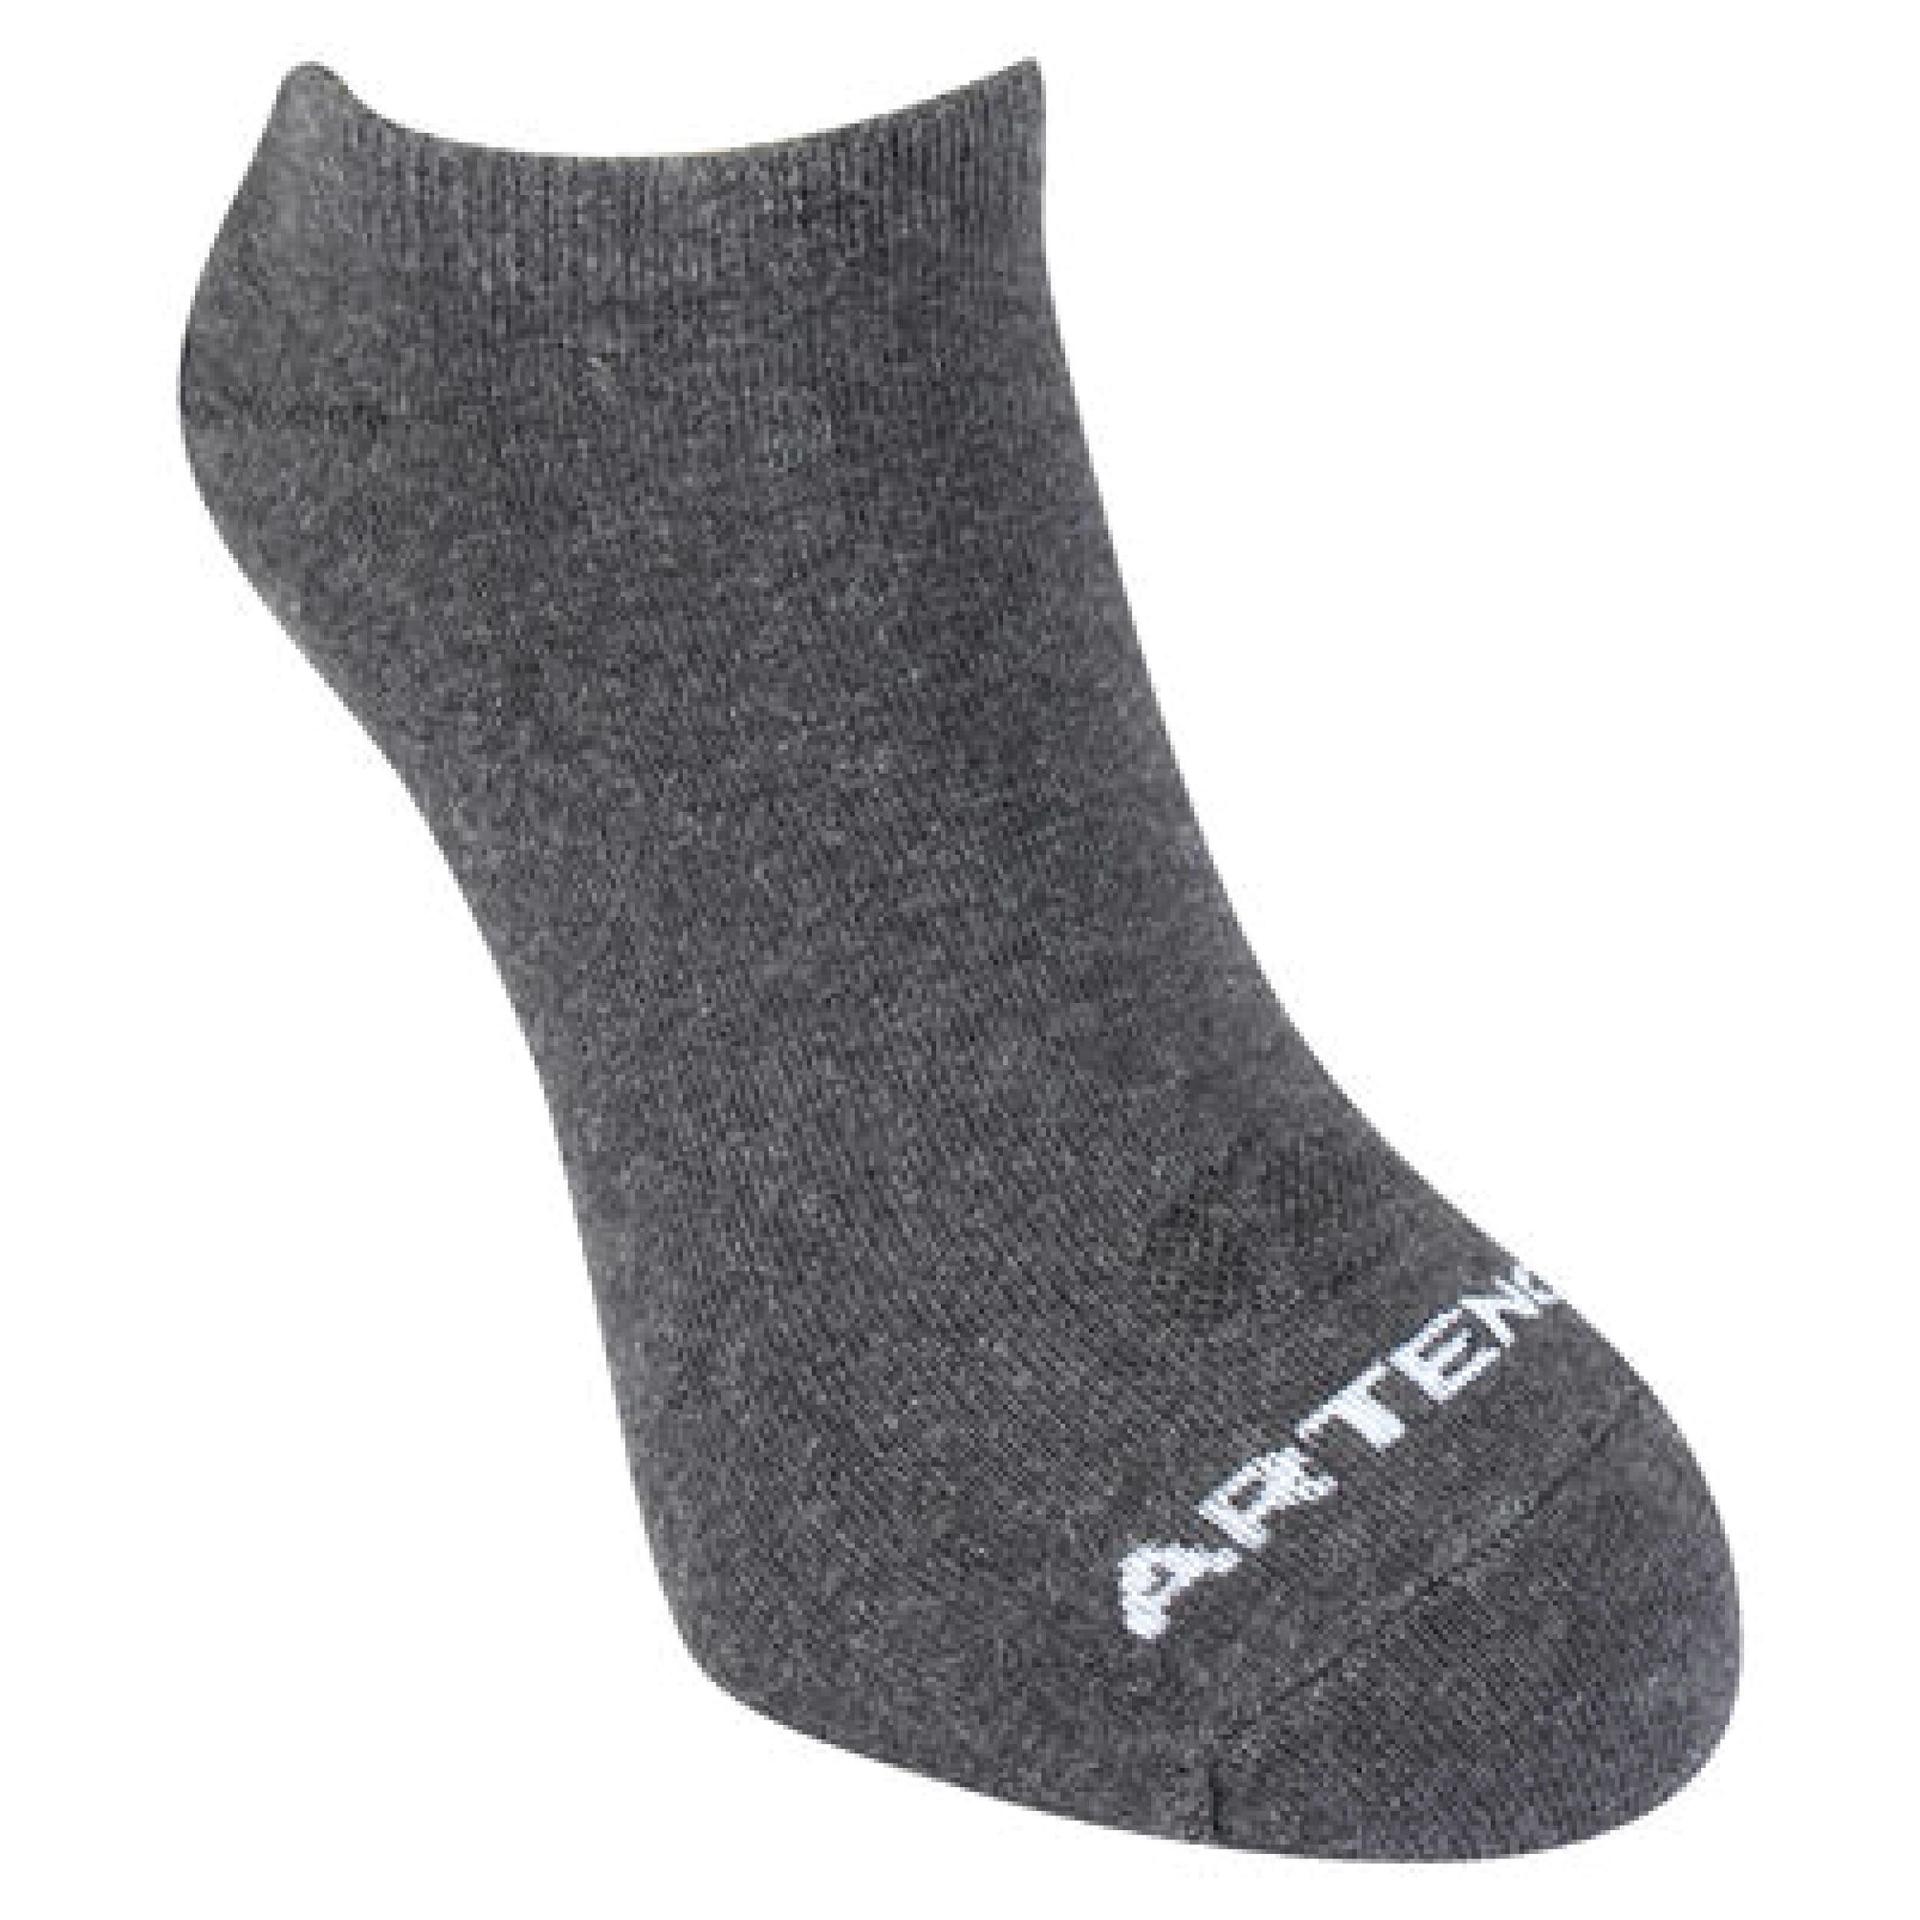 adult tennis socks low ankle x1 - rs160 grey